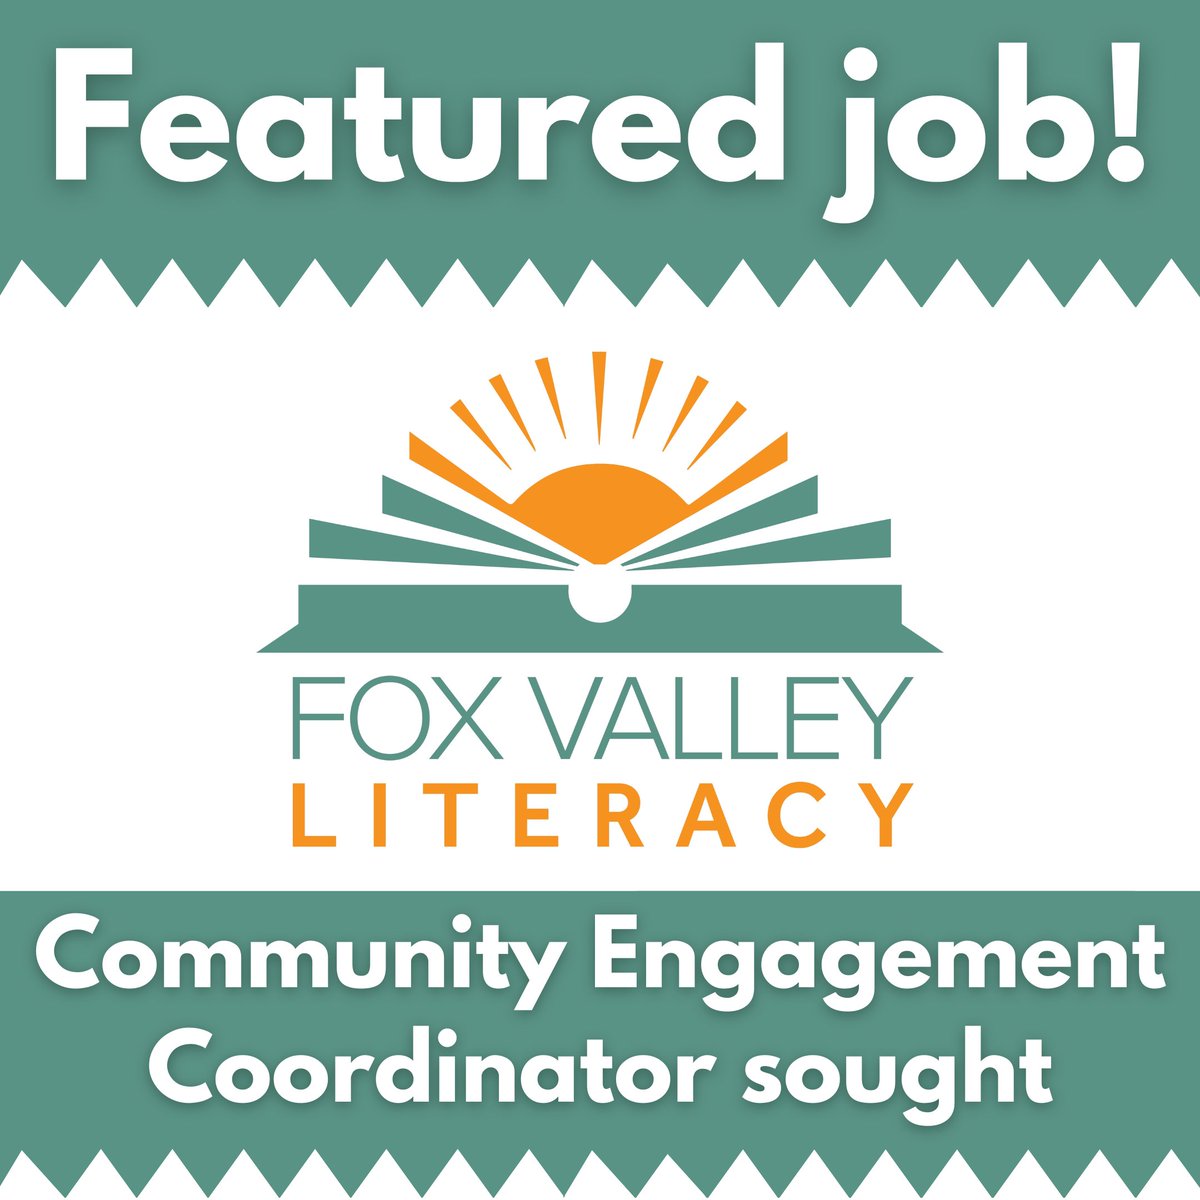 Join @FoxValleyLit as a Community Engagement Coordinator (learn more or apply ➡️ tinyurl.com/4fv793bp) in #Appleton. $42K-$48K salary + benefits—apply now for this important #job opening!

#NonprofitJobs #AppletonWI #AppletonJobs #FoxValley #FoxCities #LoVols #NonprofitCareers